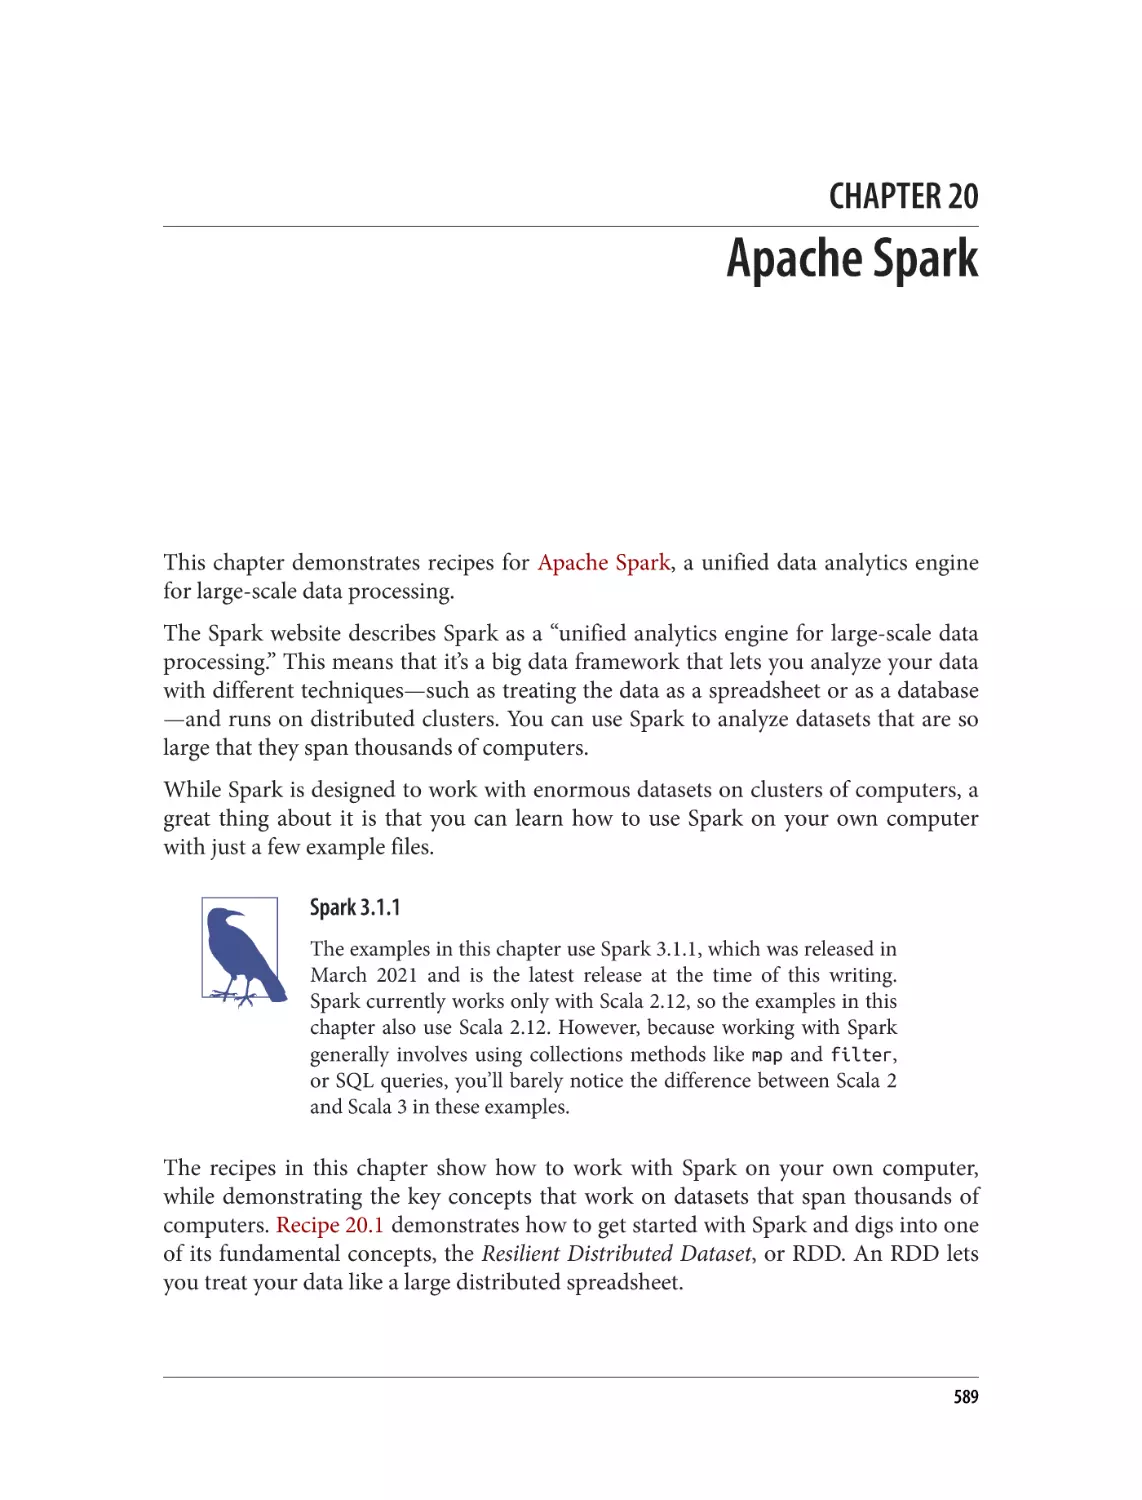 Chapter 20. Apache Spark